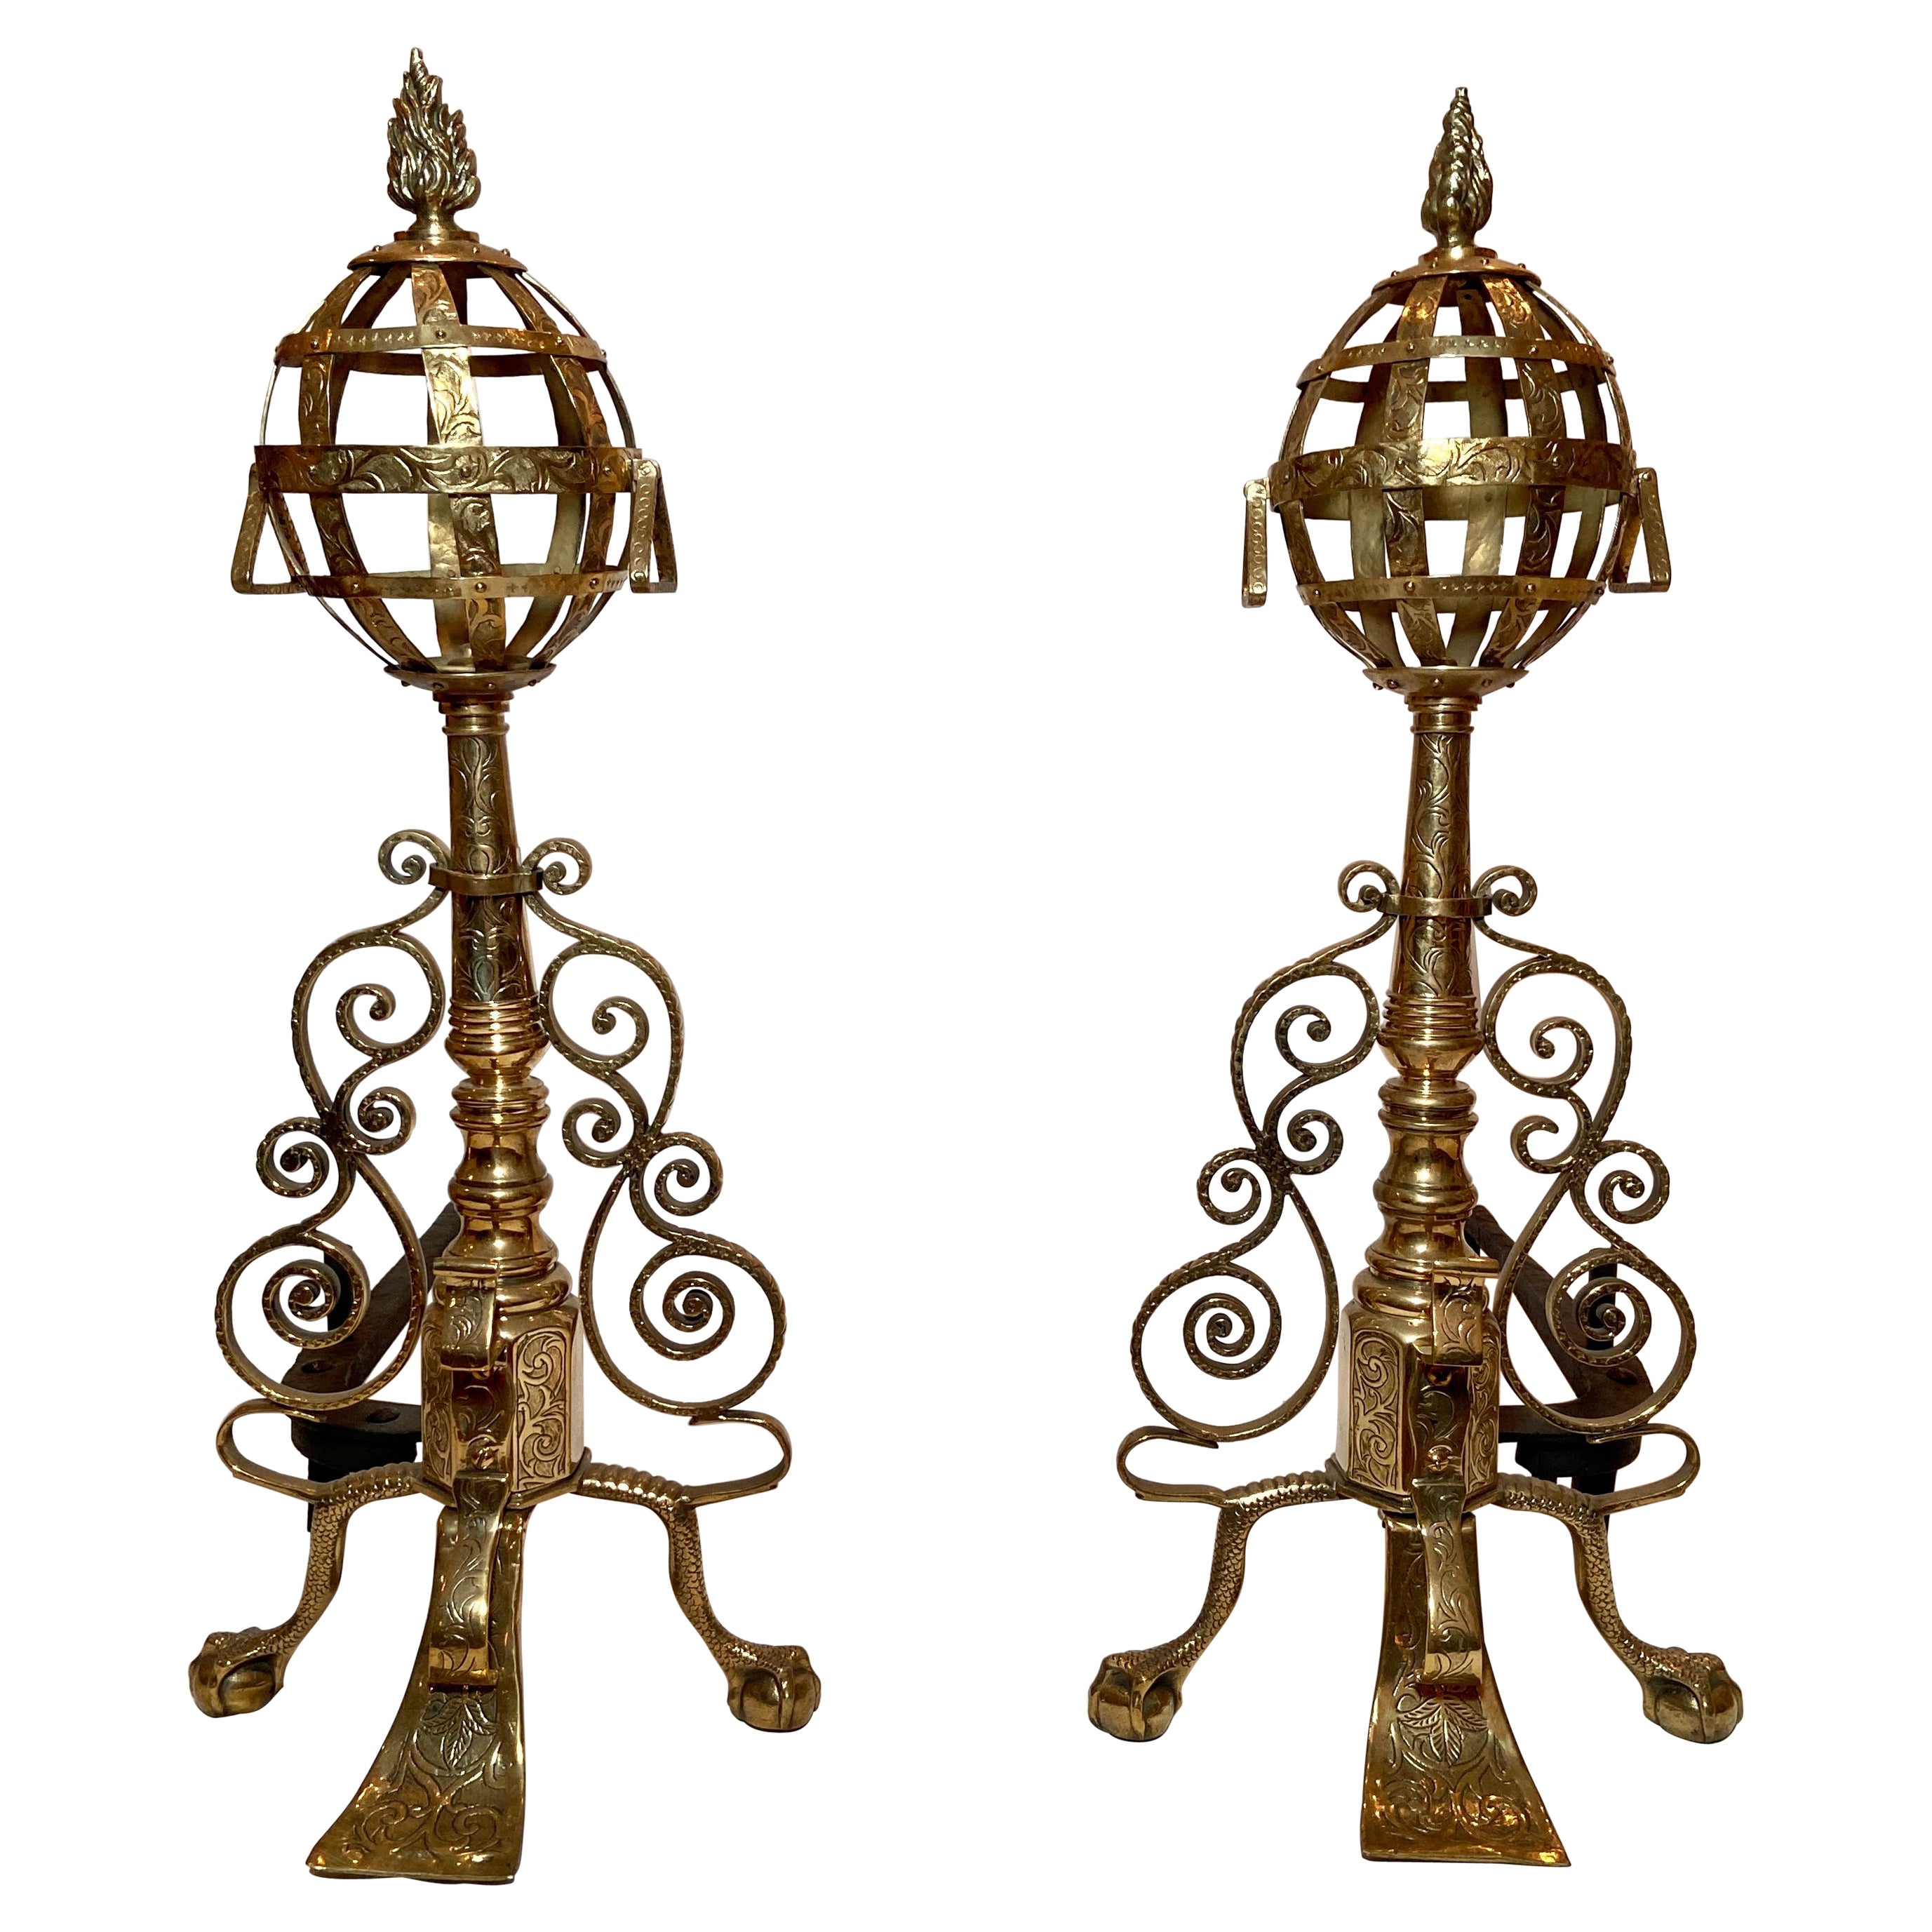 Pair Antique English Victorian Brass Andirons with Scrollwork Design, circa 1890 For Sale